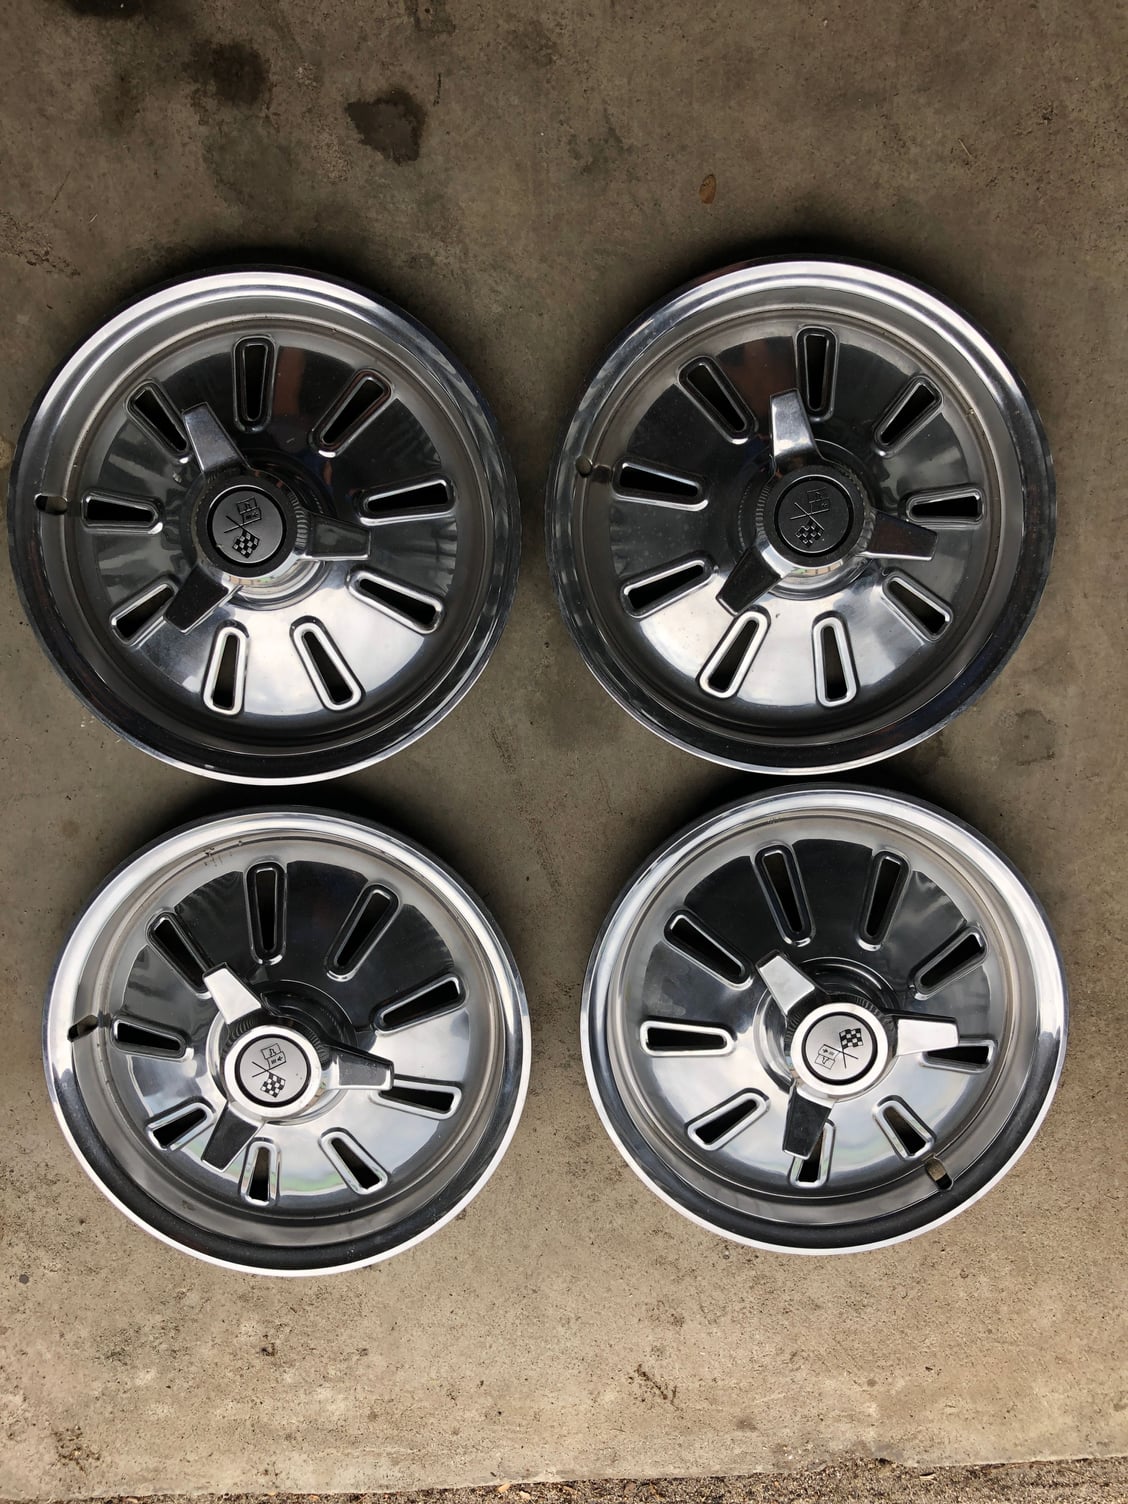 FS (For Sale) Set of 4 1964 wheels and covers - CorvetteForum ...